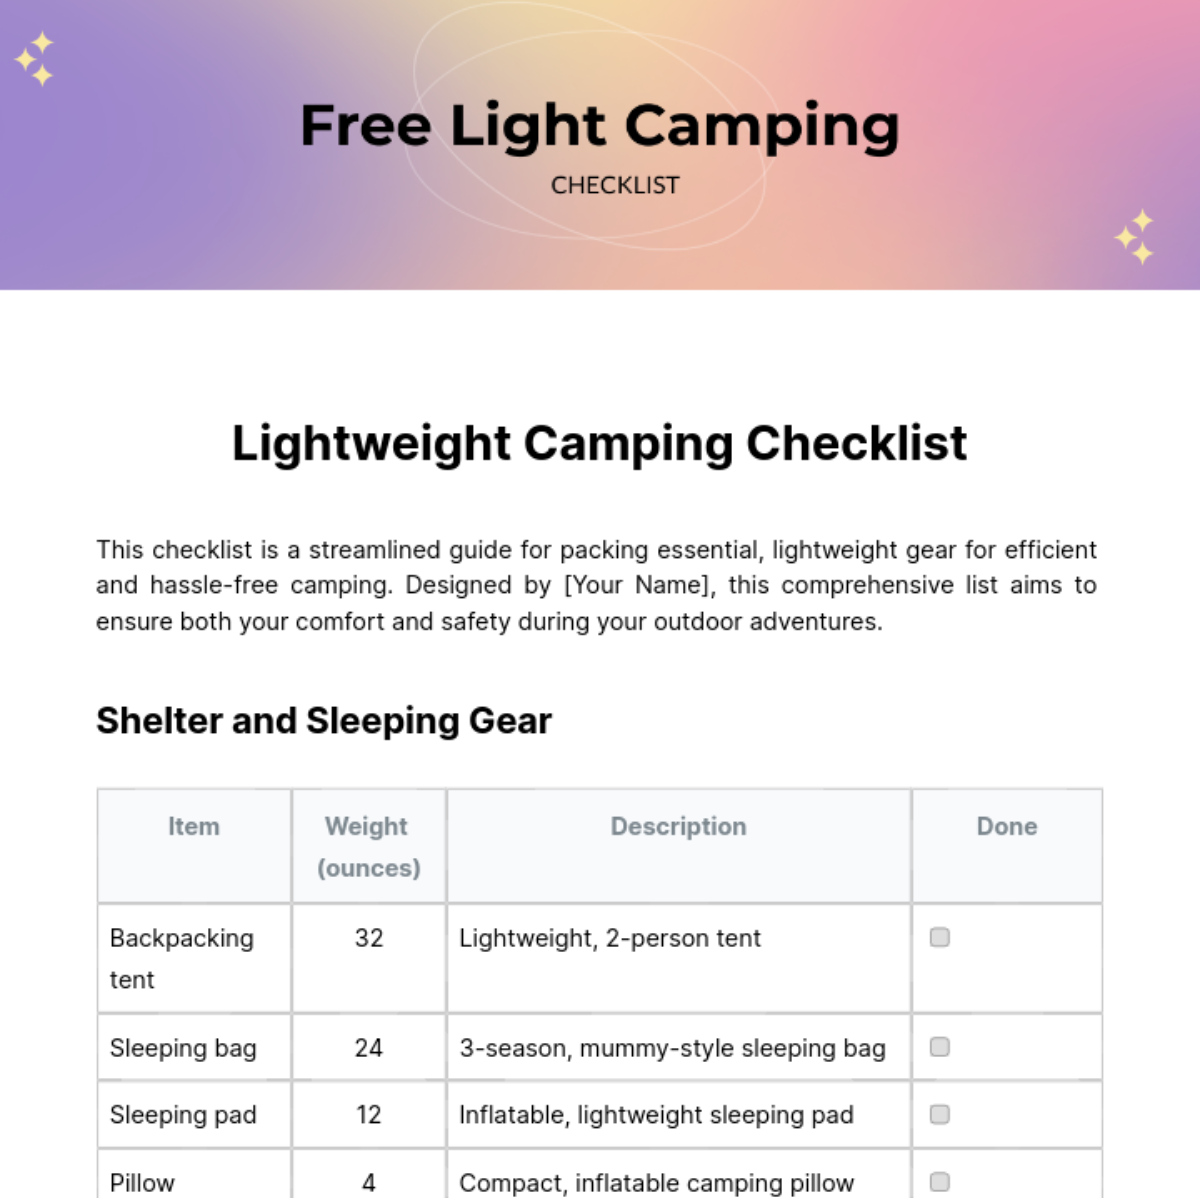 Free Light Camping Checklist Template